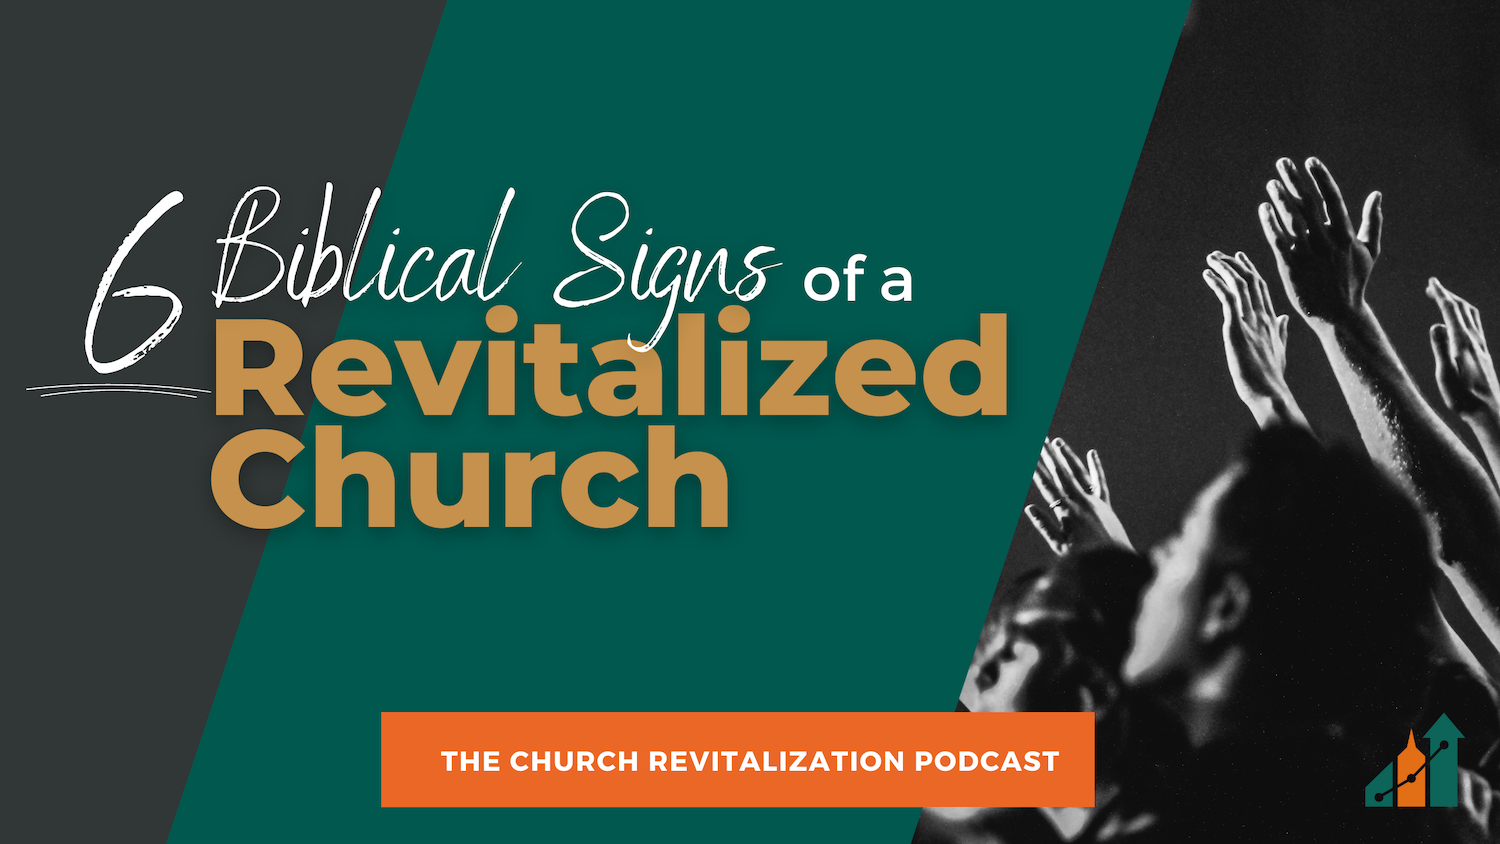 Six Biblical Signs of a Revitalized Church